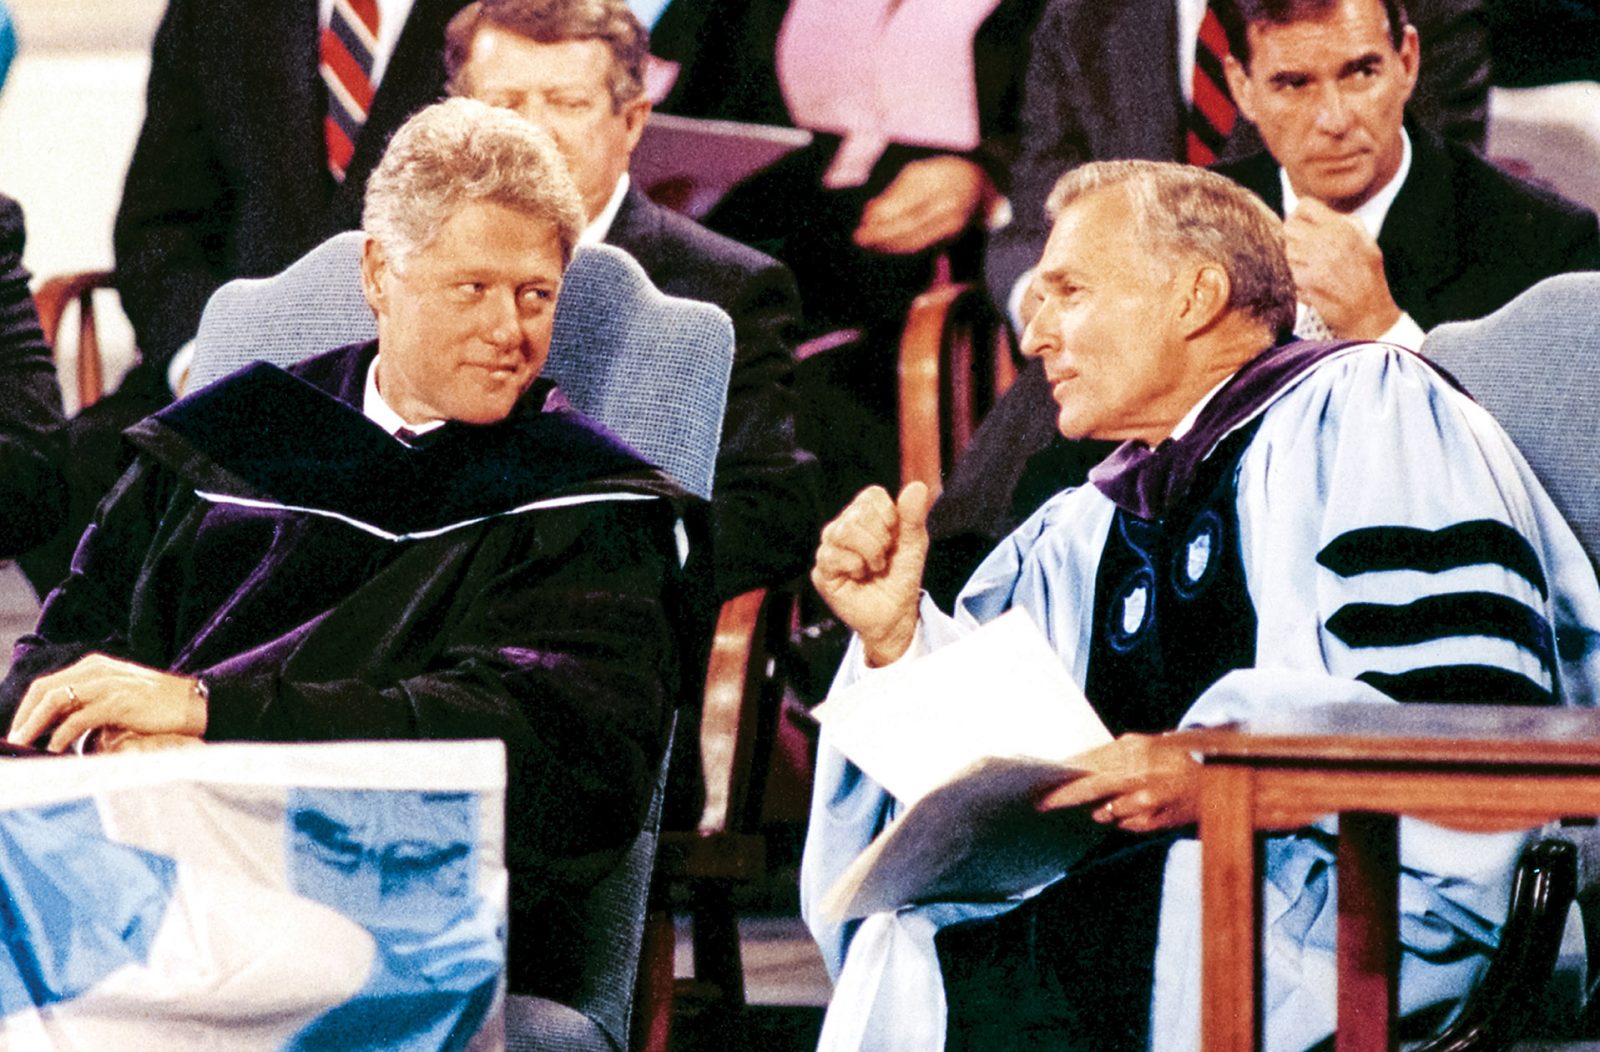 President Bill Clinton speaks with UNC Chancellor Paul Hardin during the University of North Carolina Bicentennial celebration October 12, 1993. (Photo by Dan Sears/UNC-Chapel Hill)